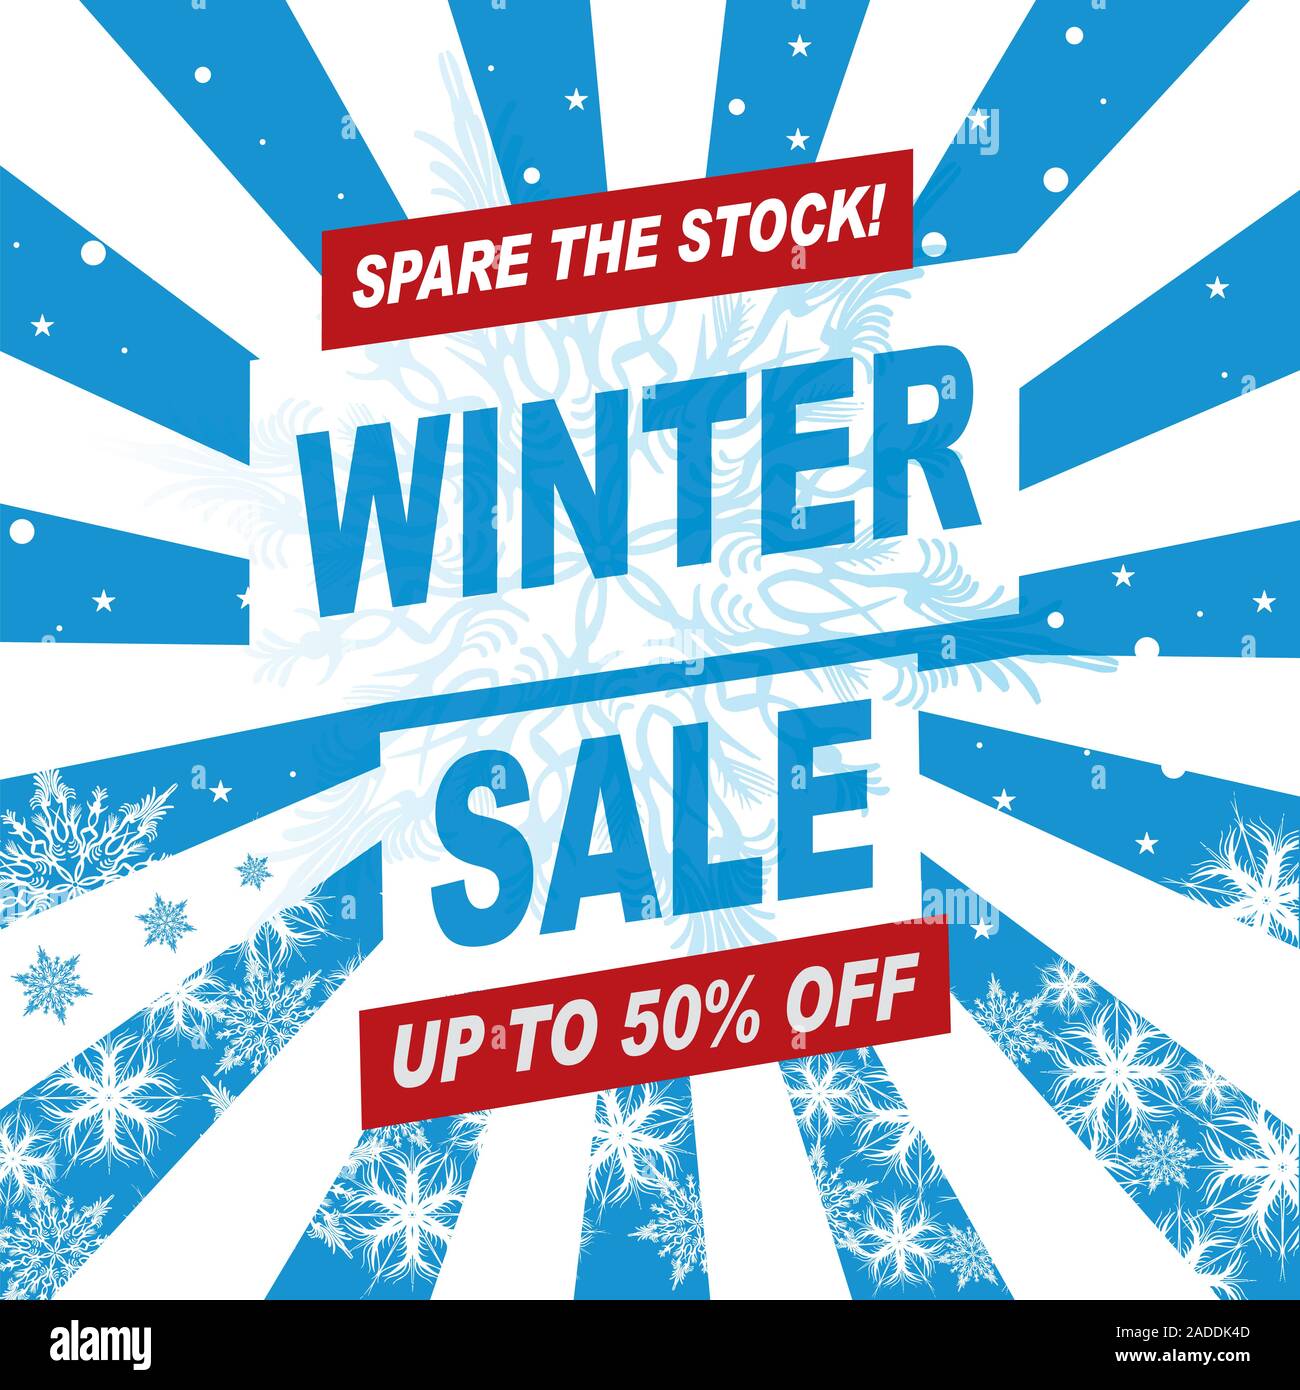 Winter sales banner. Blue abstract lines and snowflakes background. Stock Vector